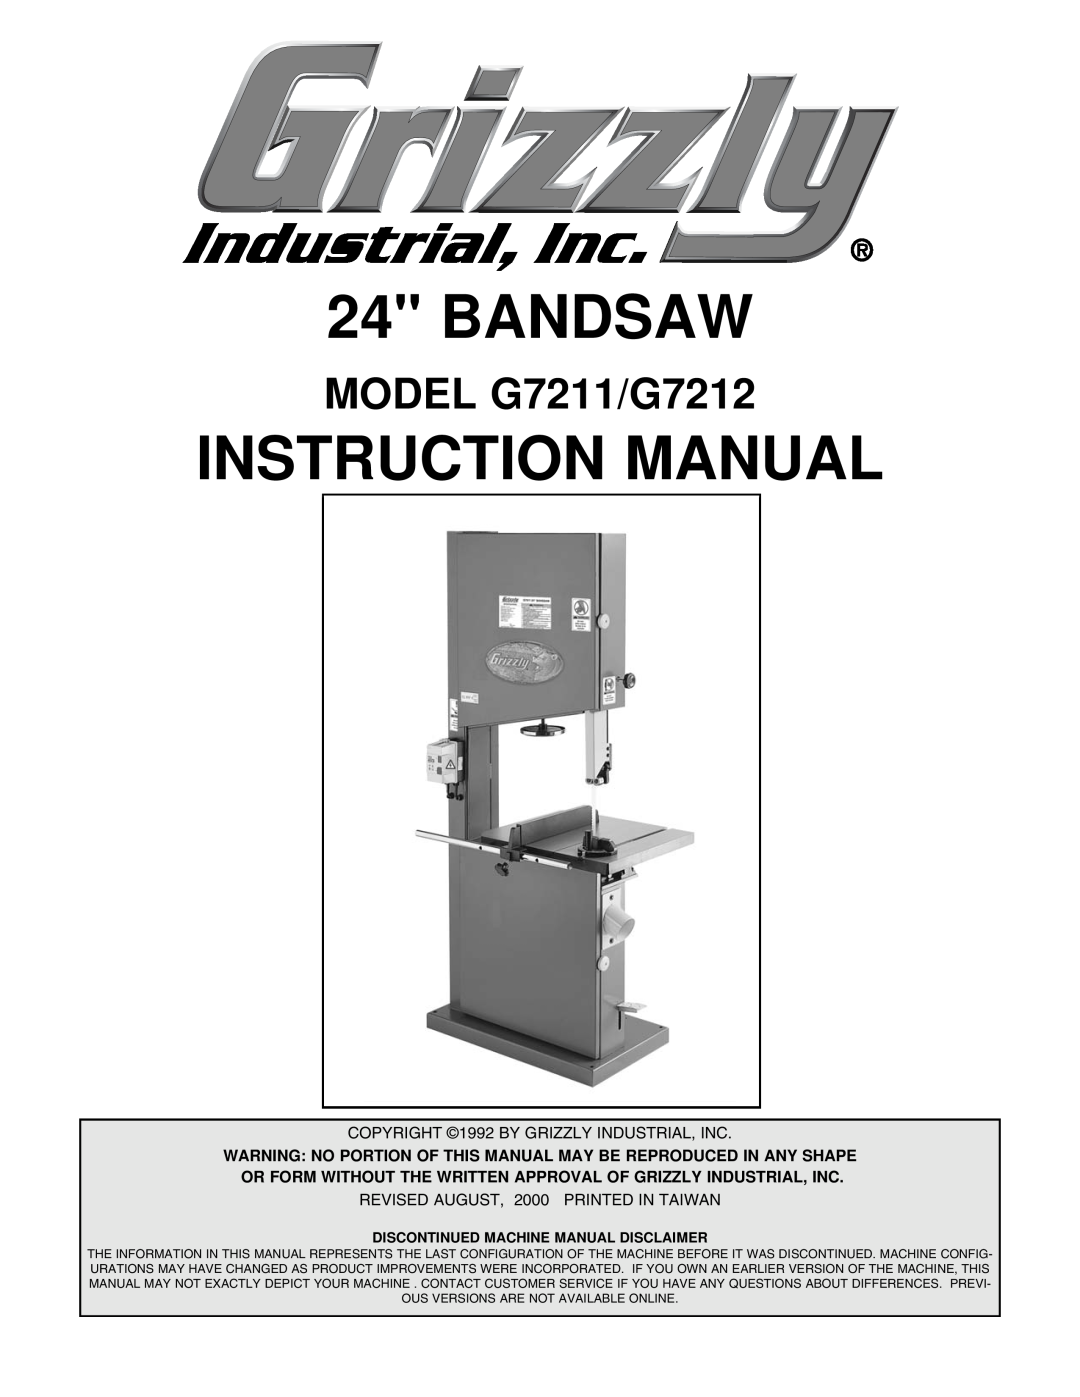 Grizzly instruction manual MODEL G7211/G7212, Bandsaw, Instruction Manual, Discontinued Machine Manual Disclaimer 